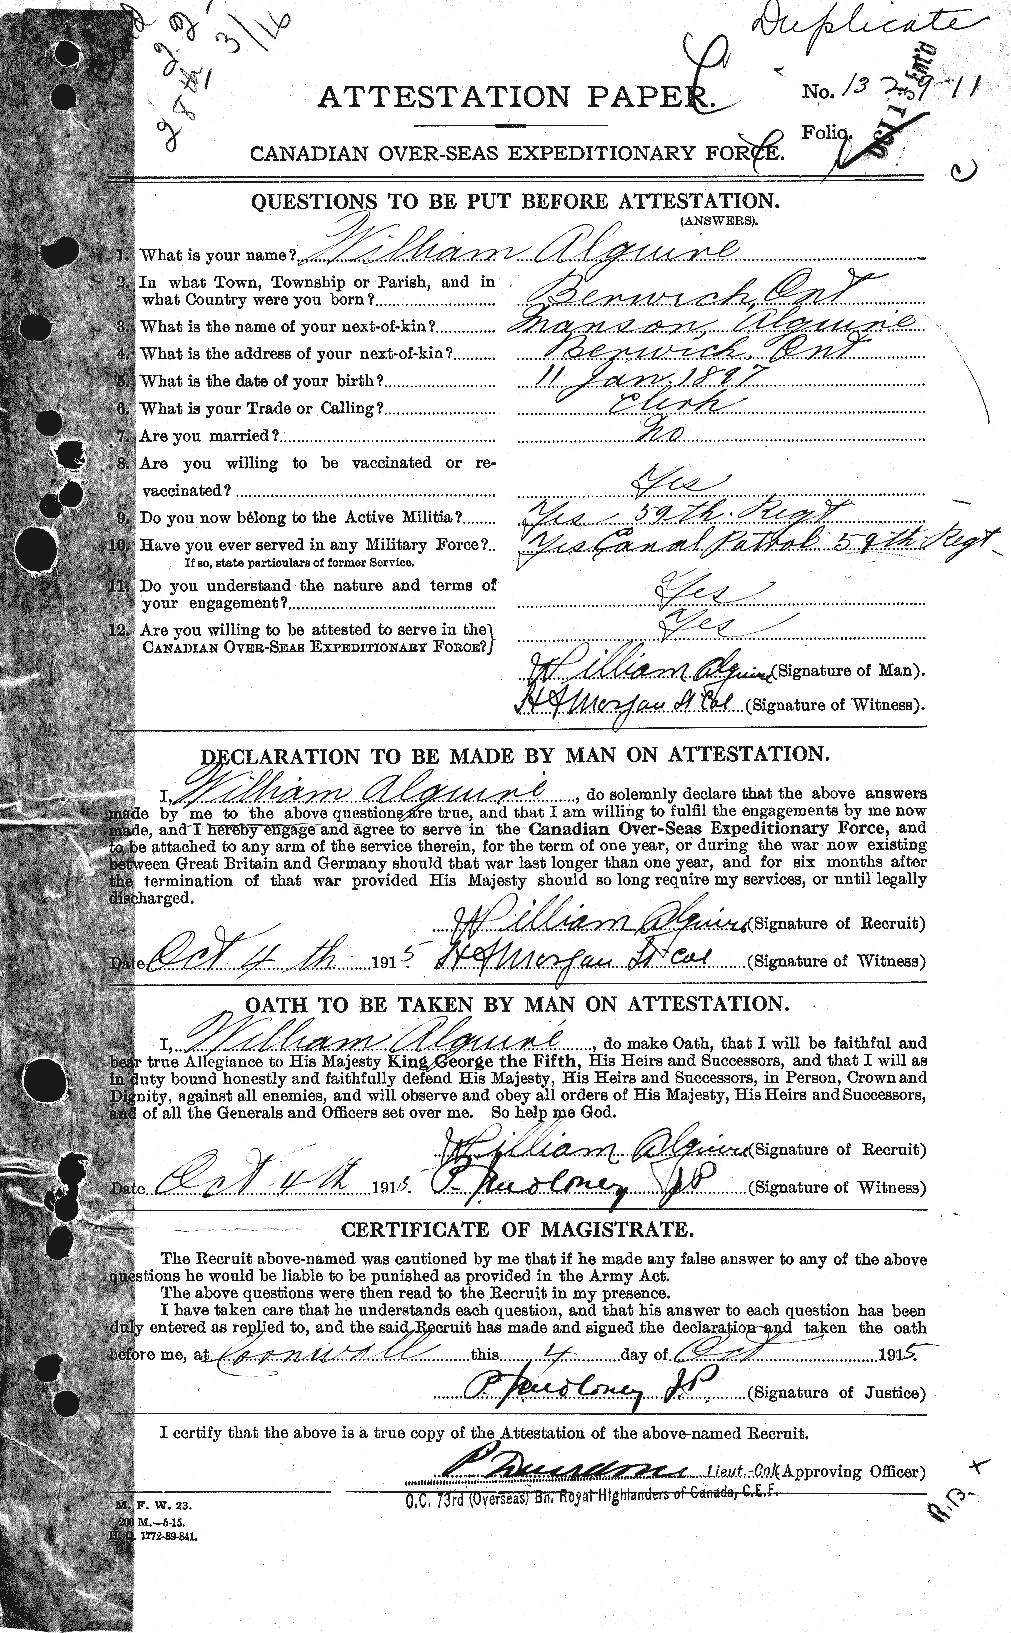 Personnel Records of the First World War - CEF 205085a